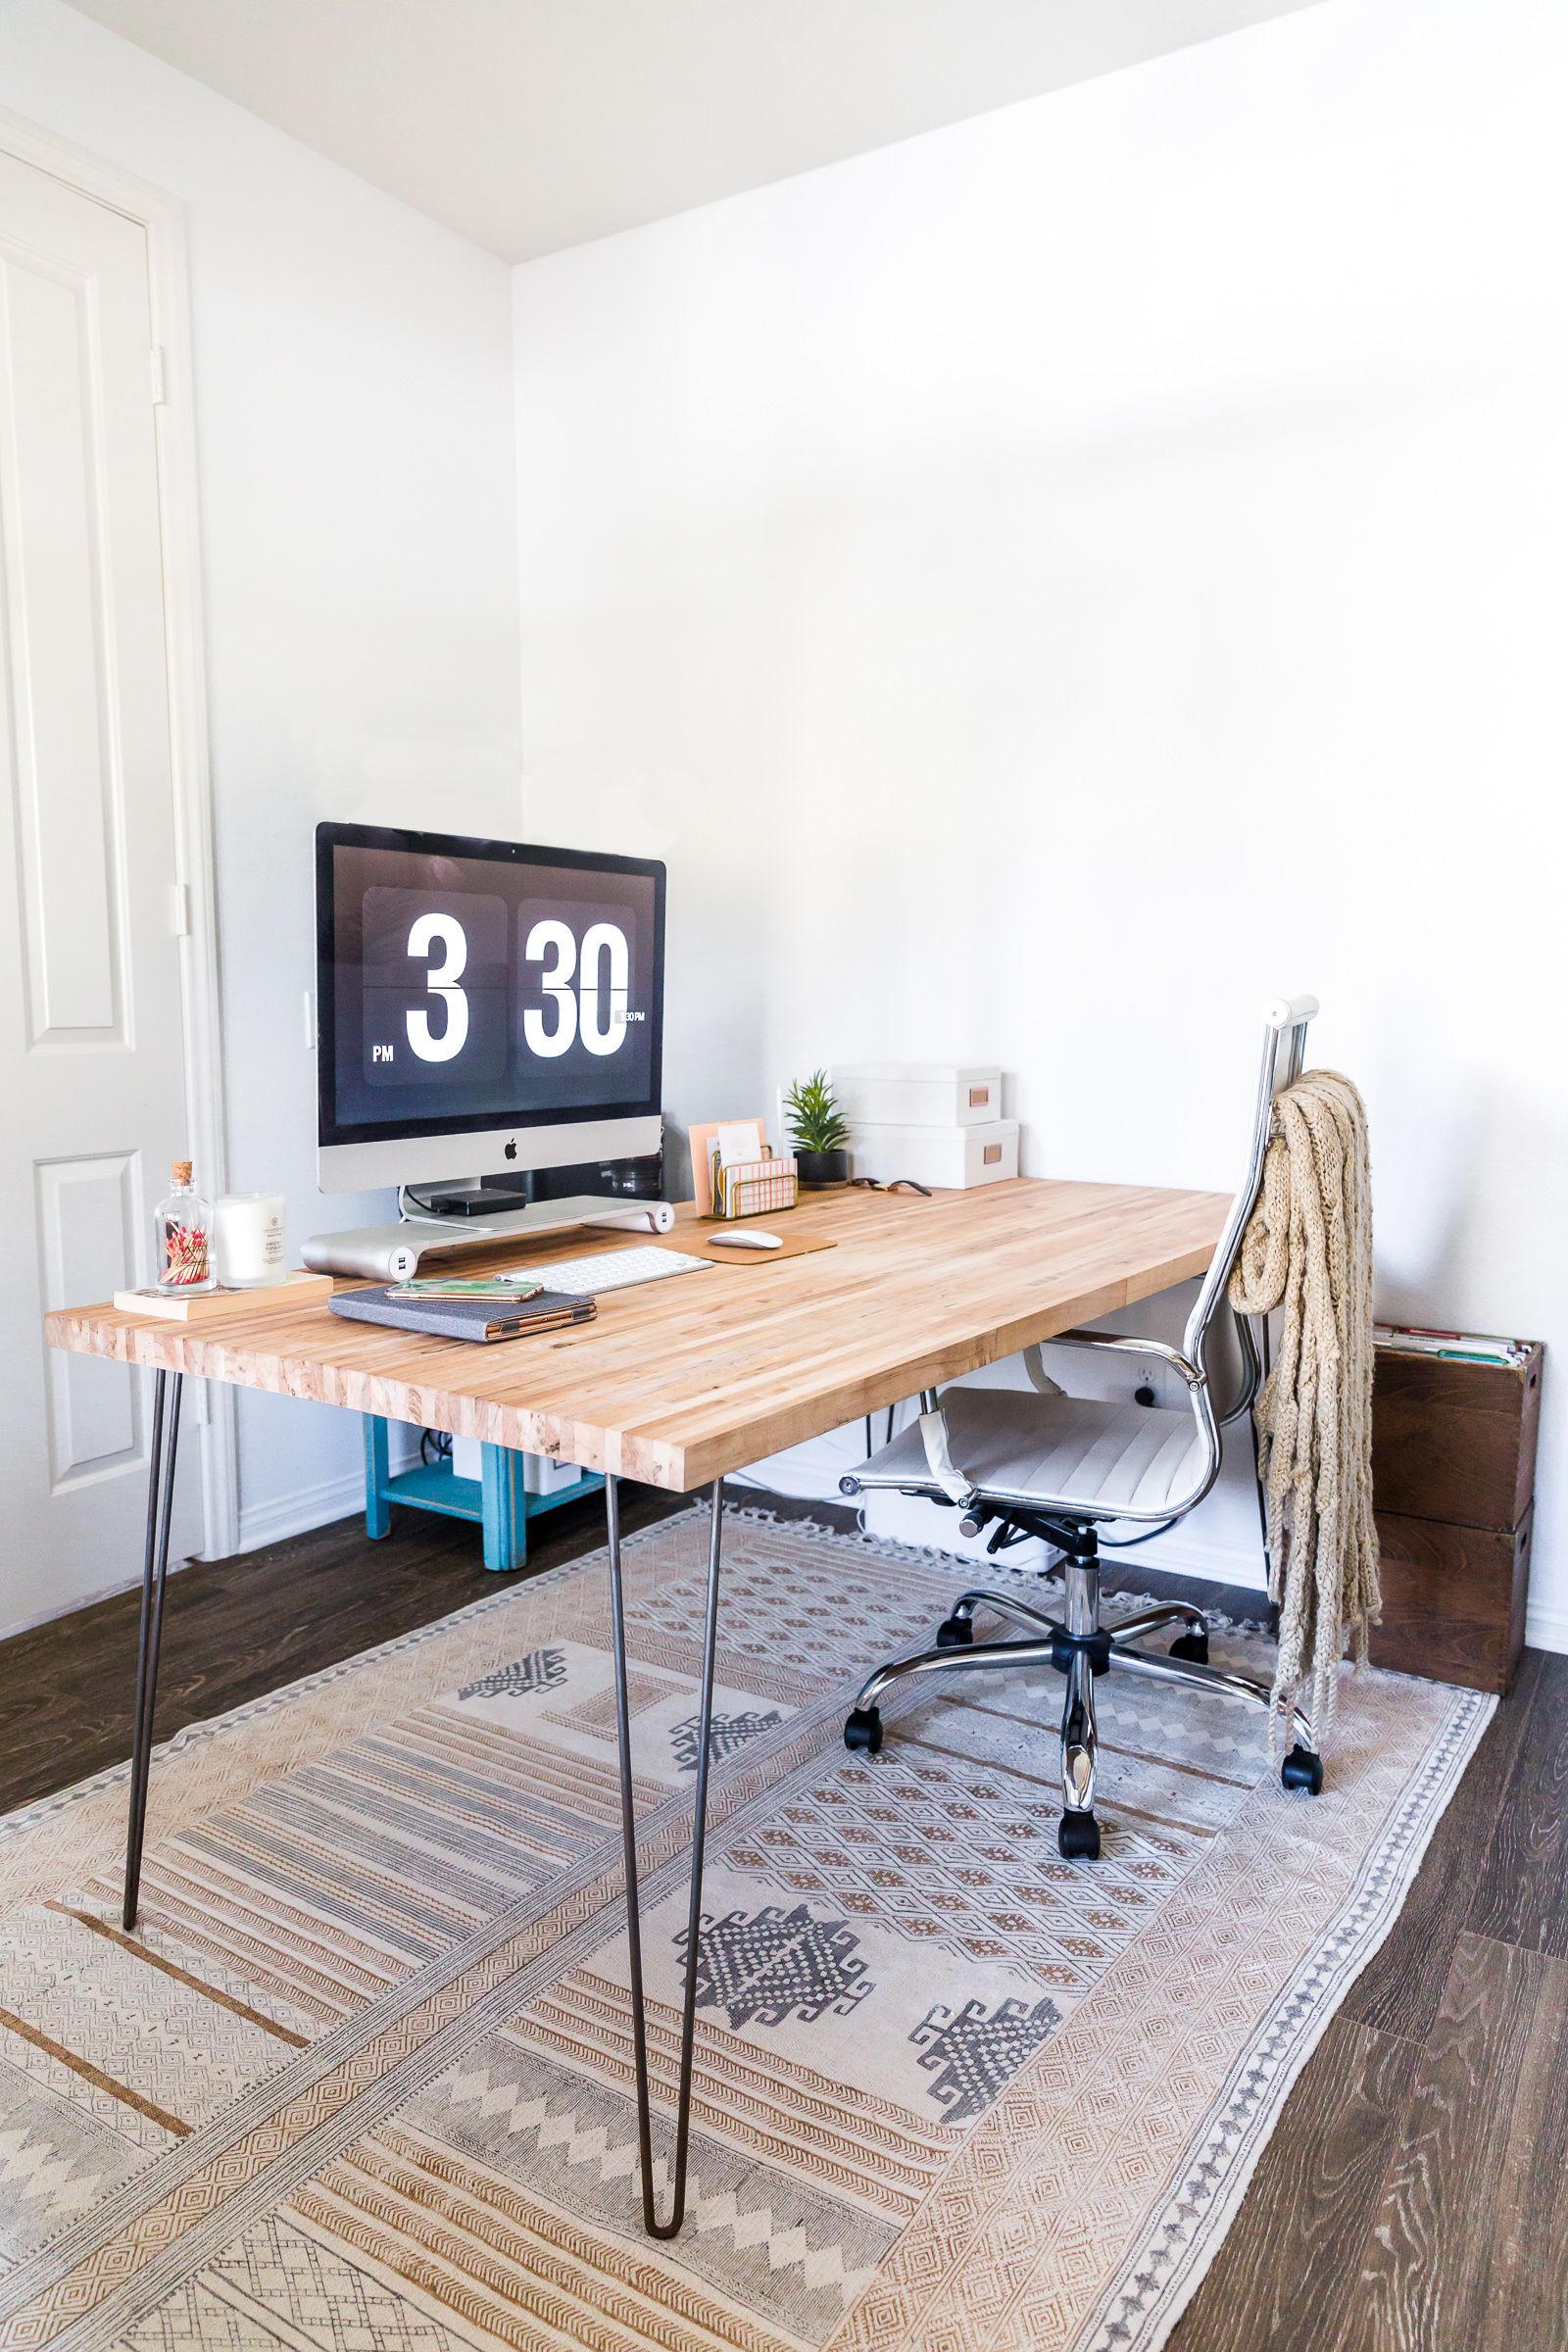 15 Diy Desk Plans For Your Home Office, How To Make A Simple Office Desk